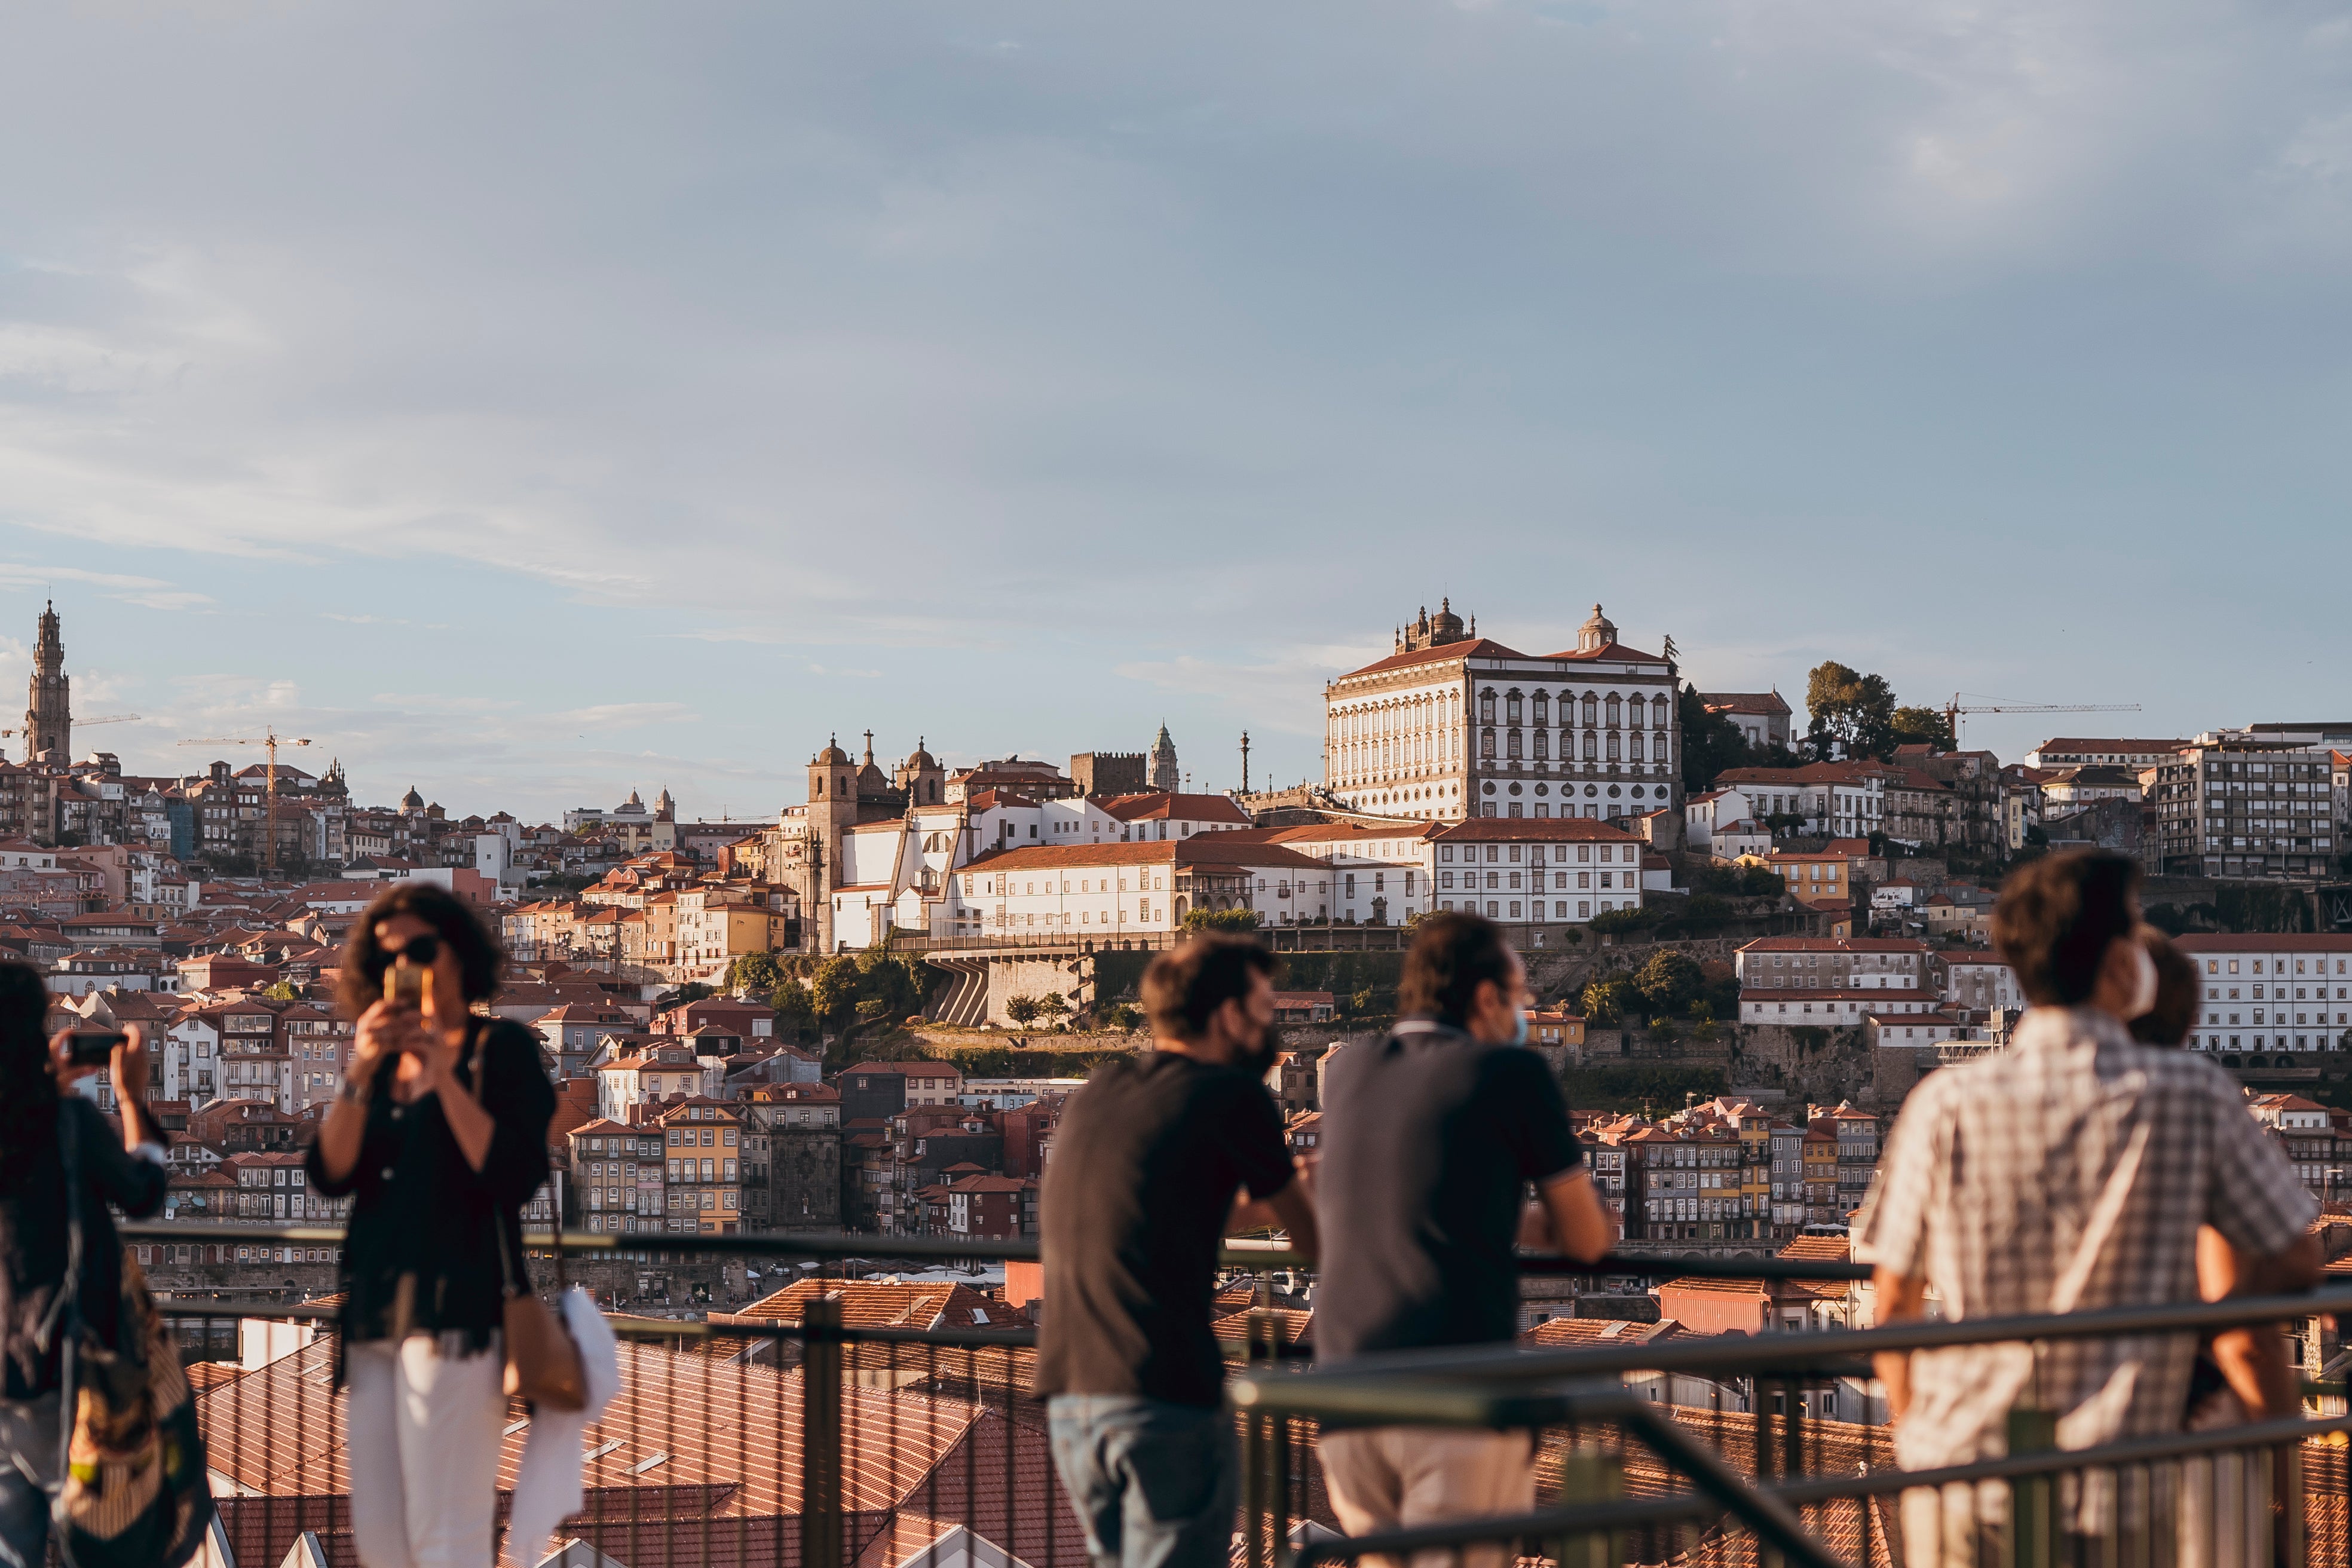 Porto’s regenerated district is breathing new life into the city